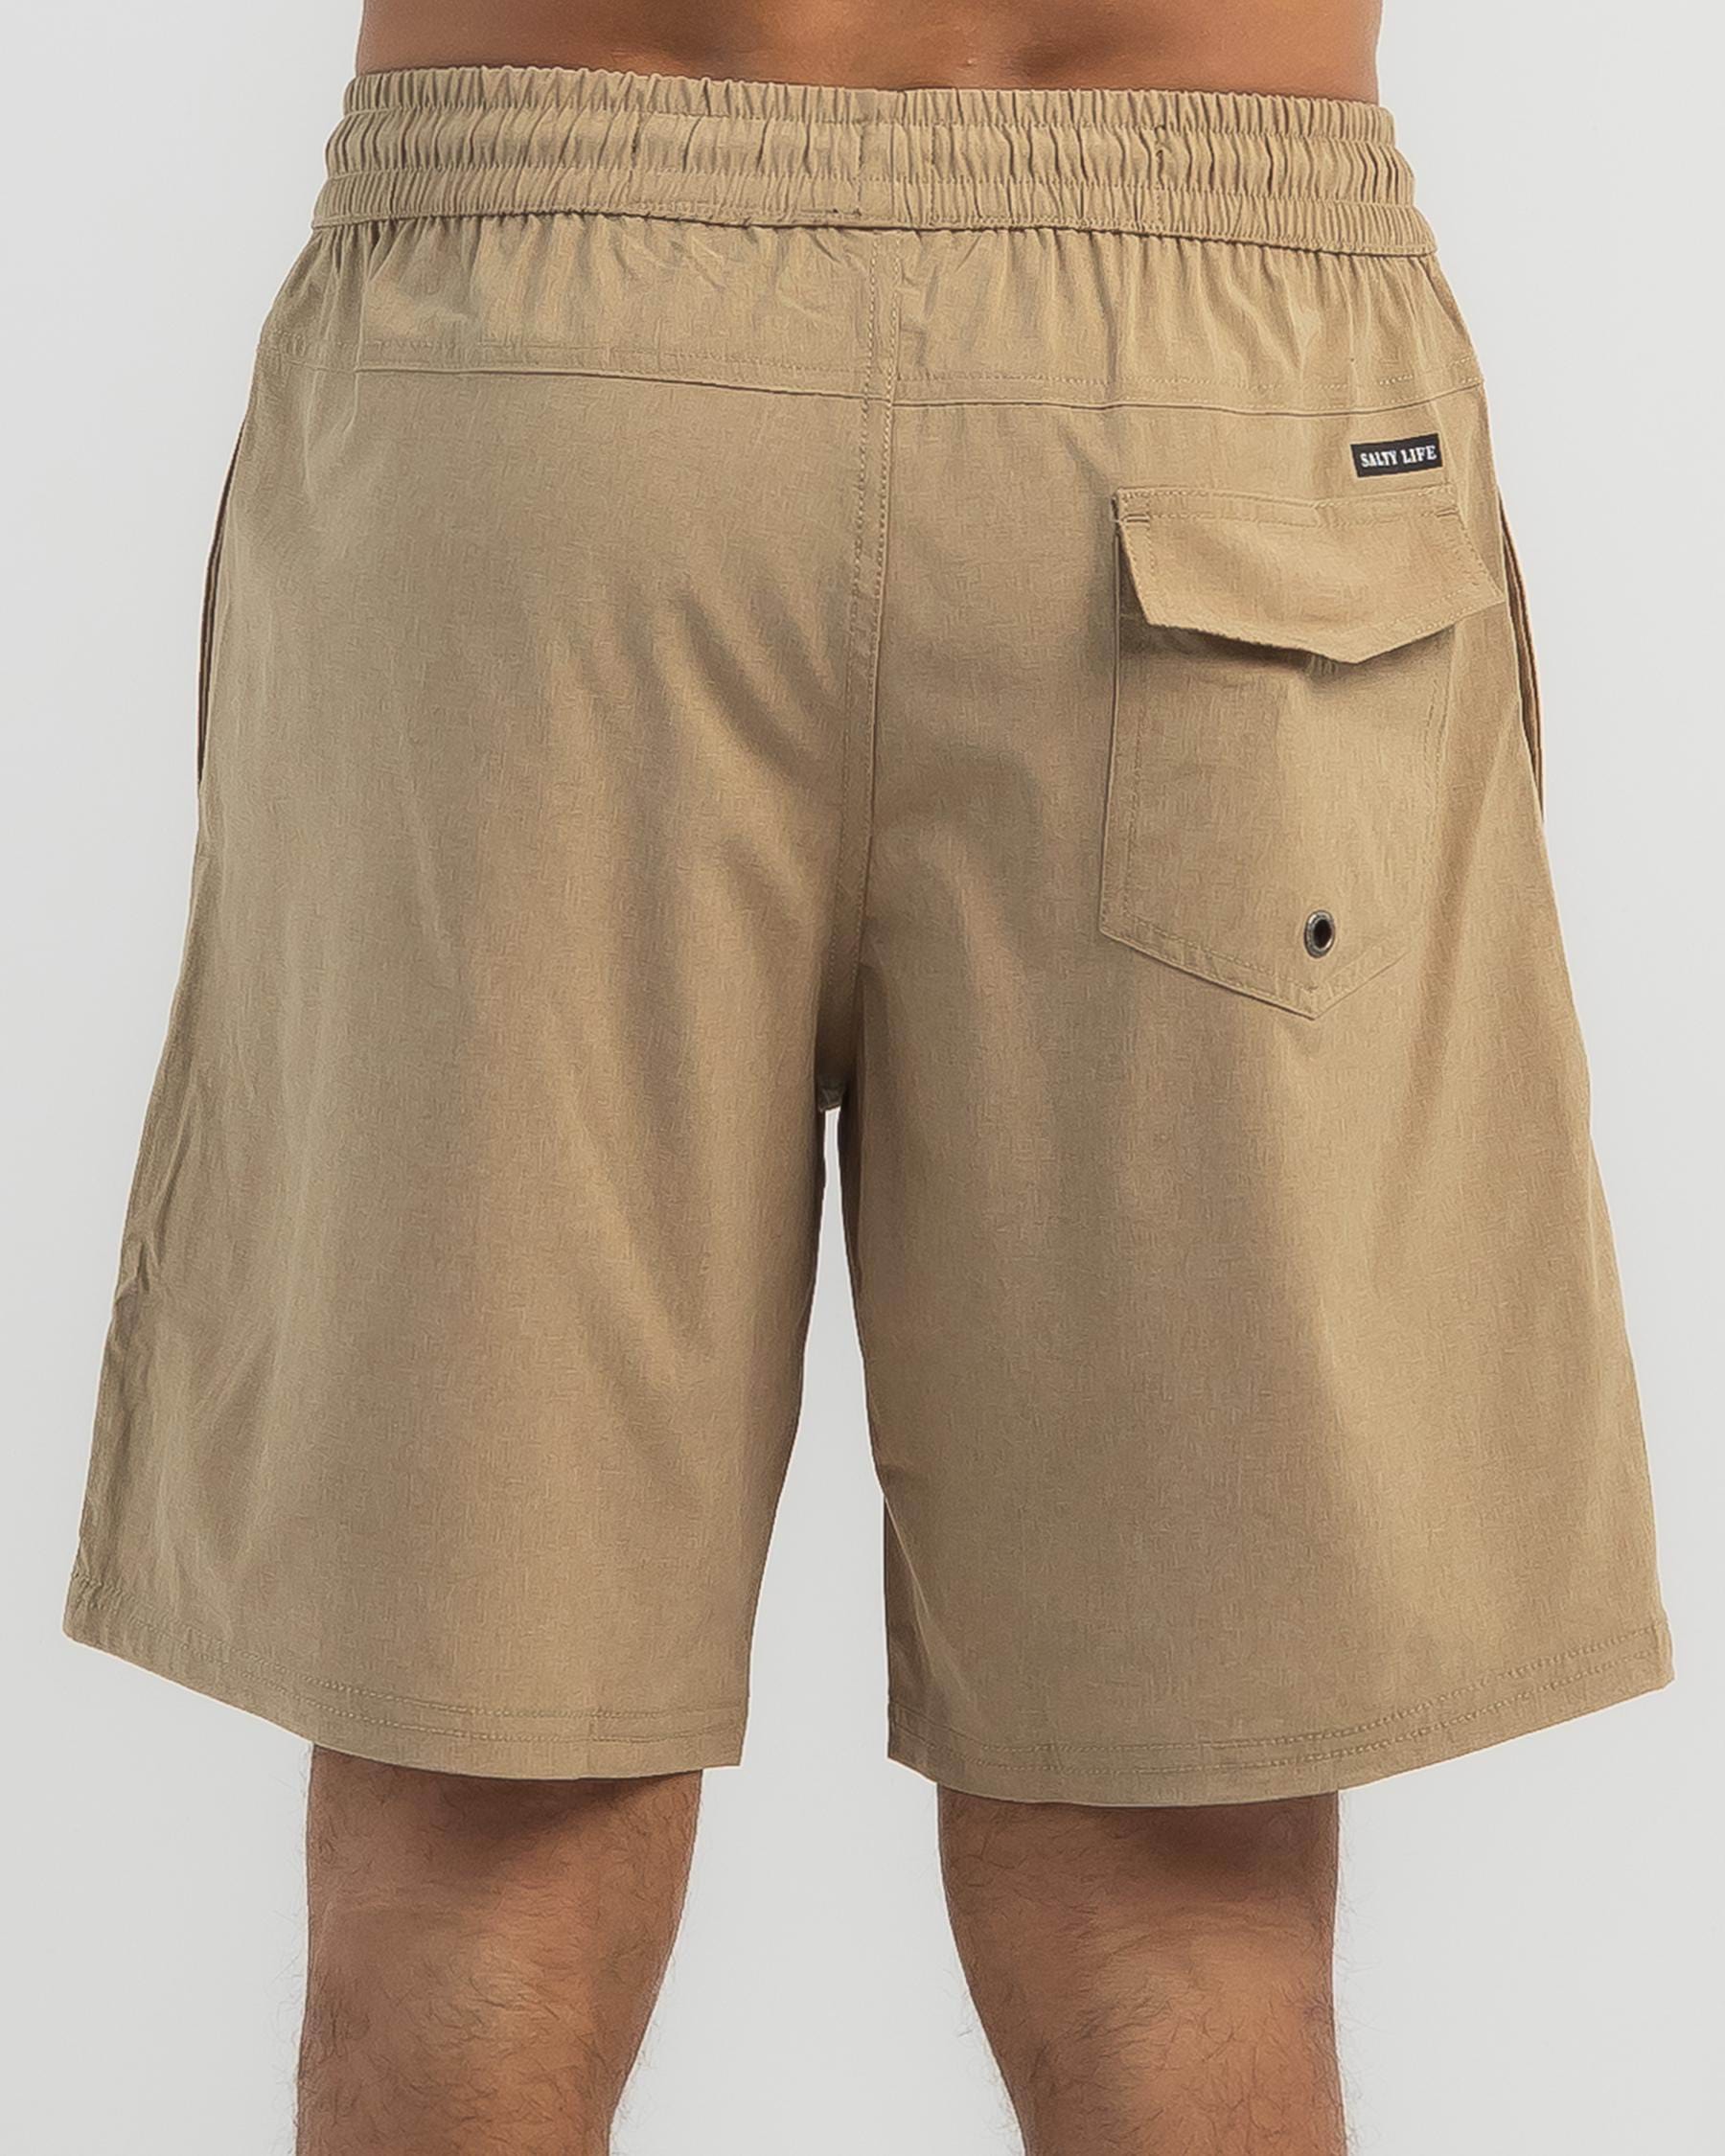 Shop Salty Life Cyclone Board Shorts In Tan - Fast Shipping & Easy ...